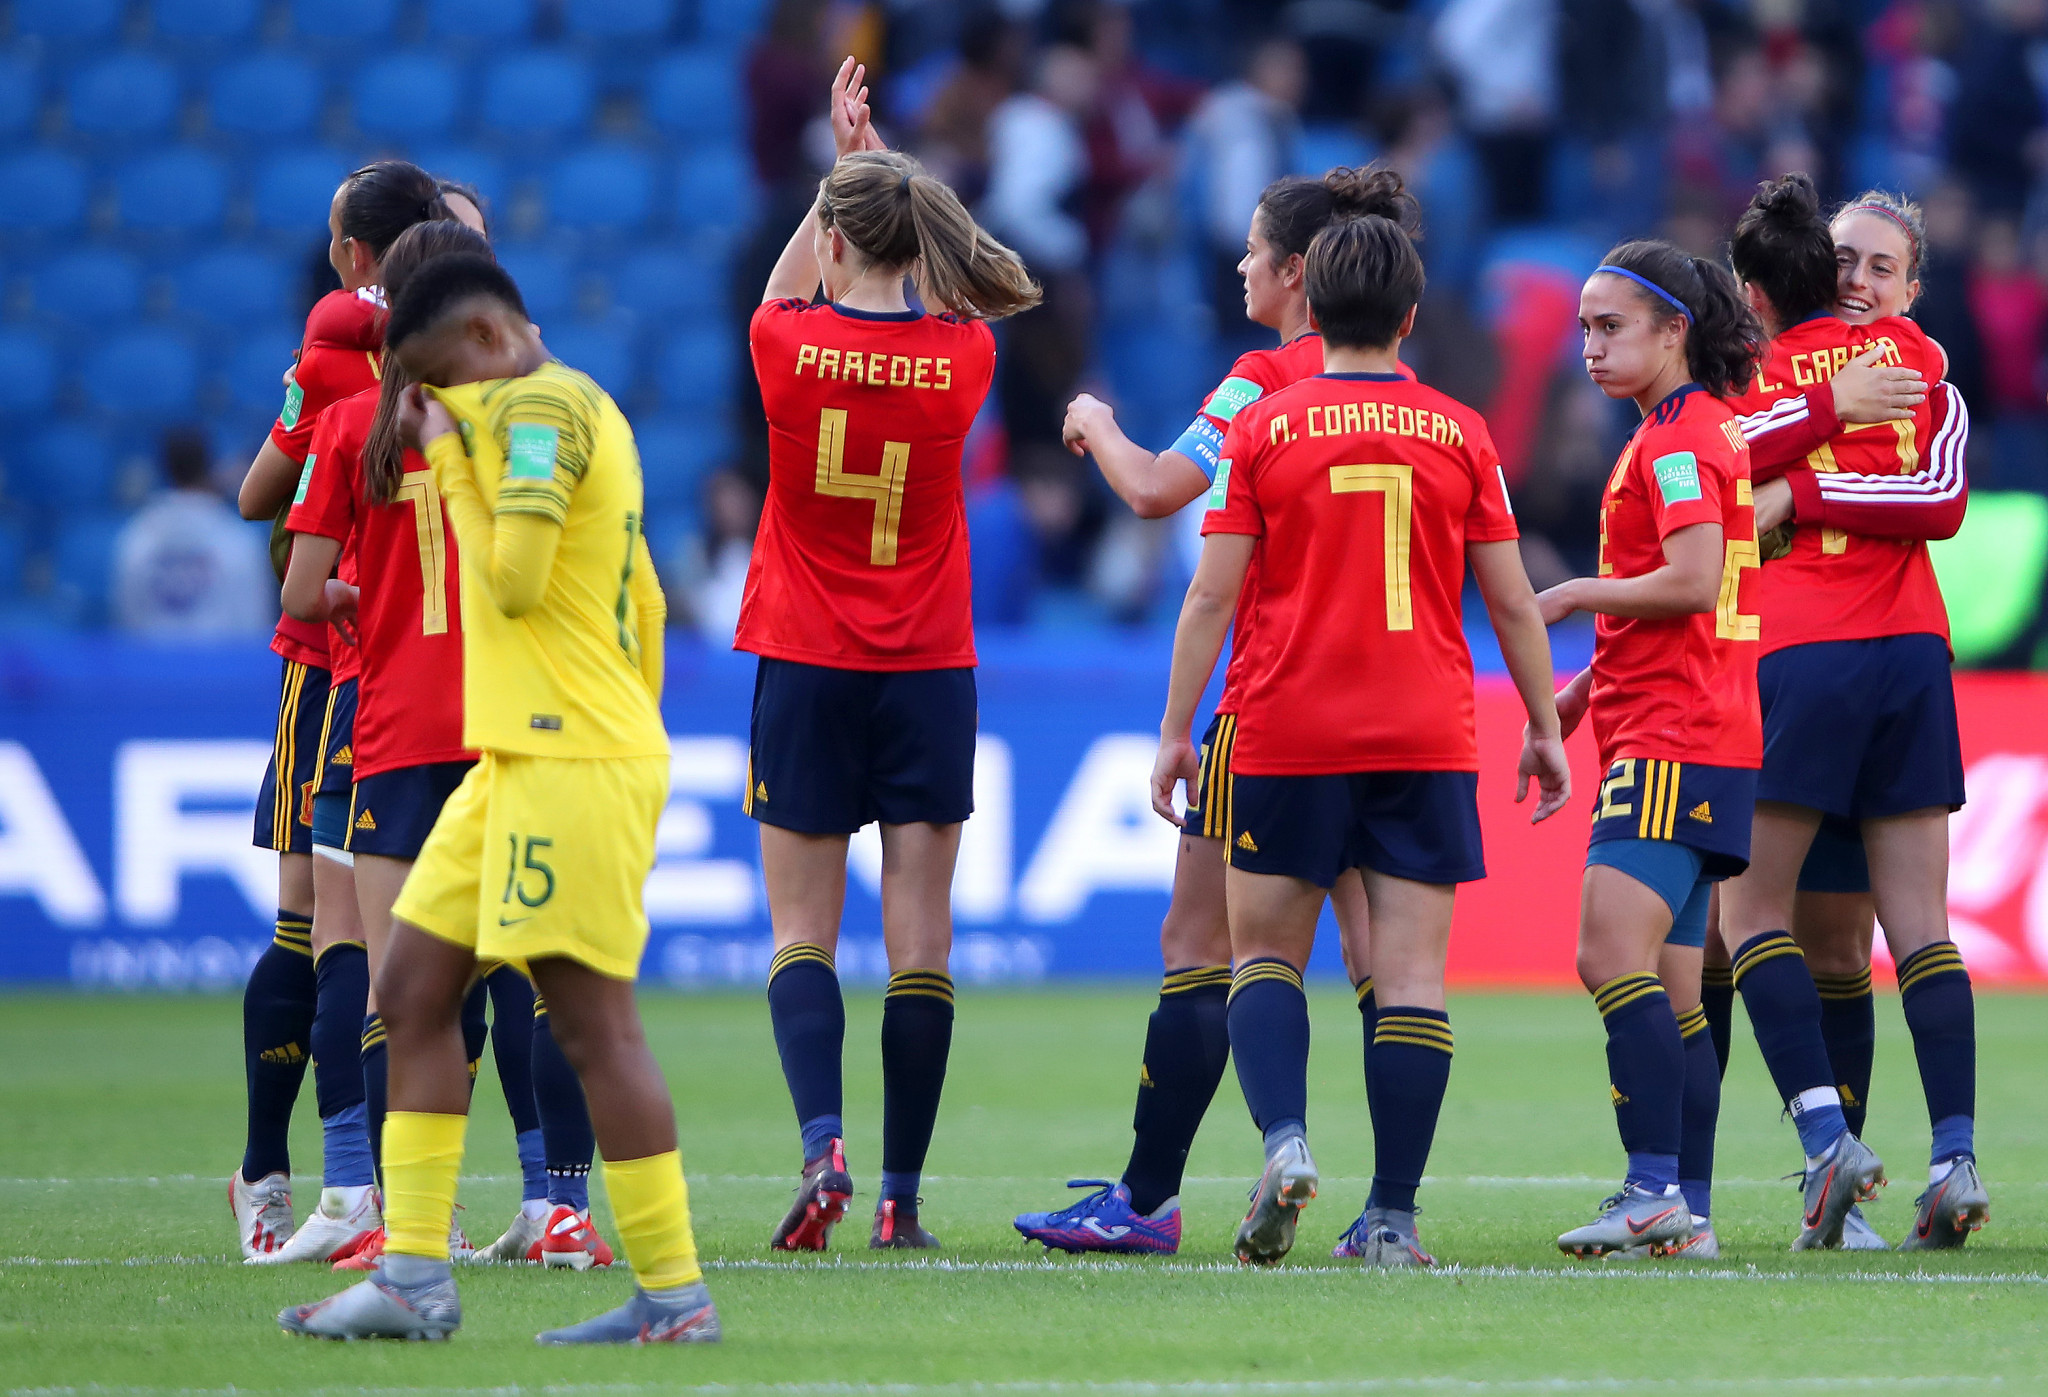 Spain beat South Africa 3-1 in Group B of the FIFA Women's World Cup ©Getty Images